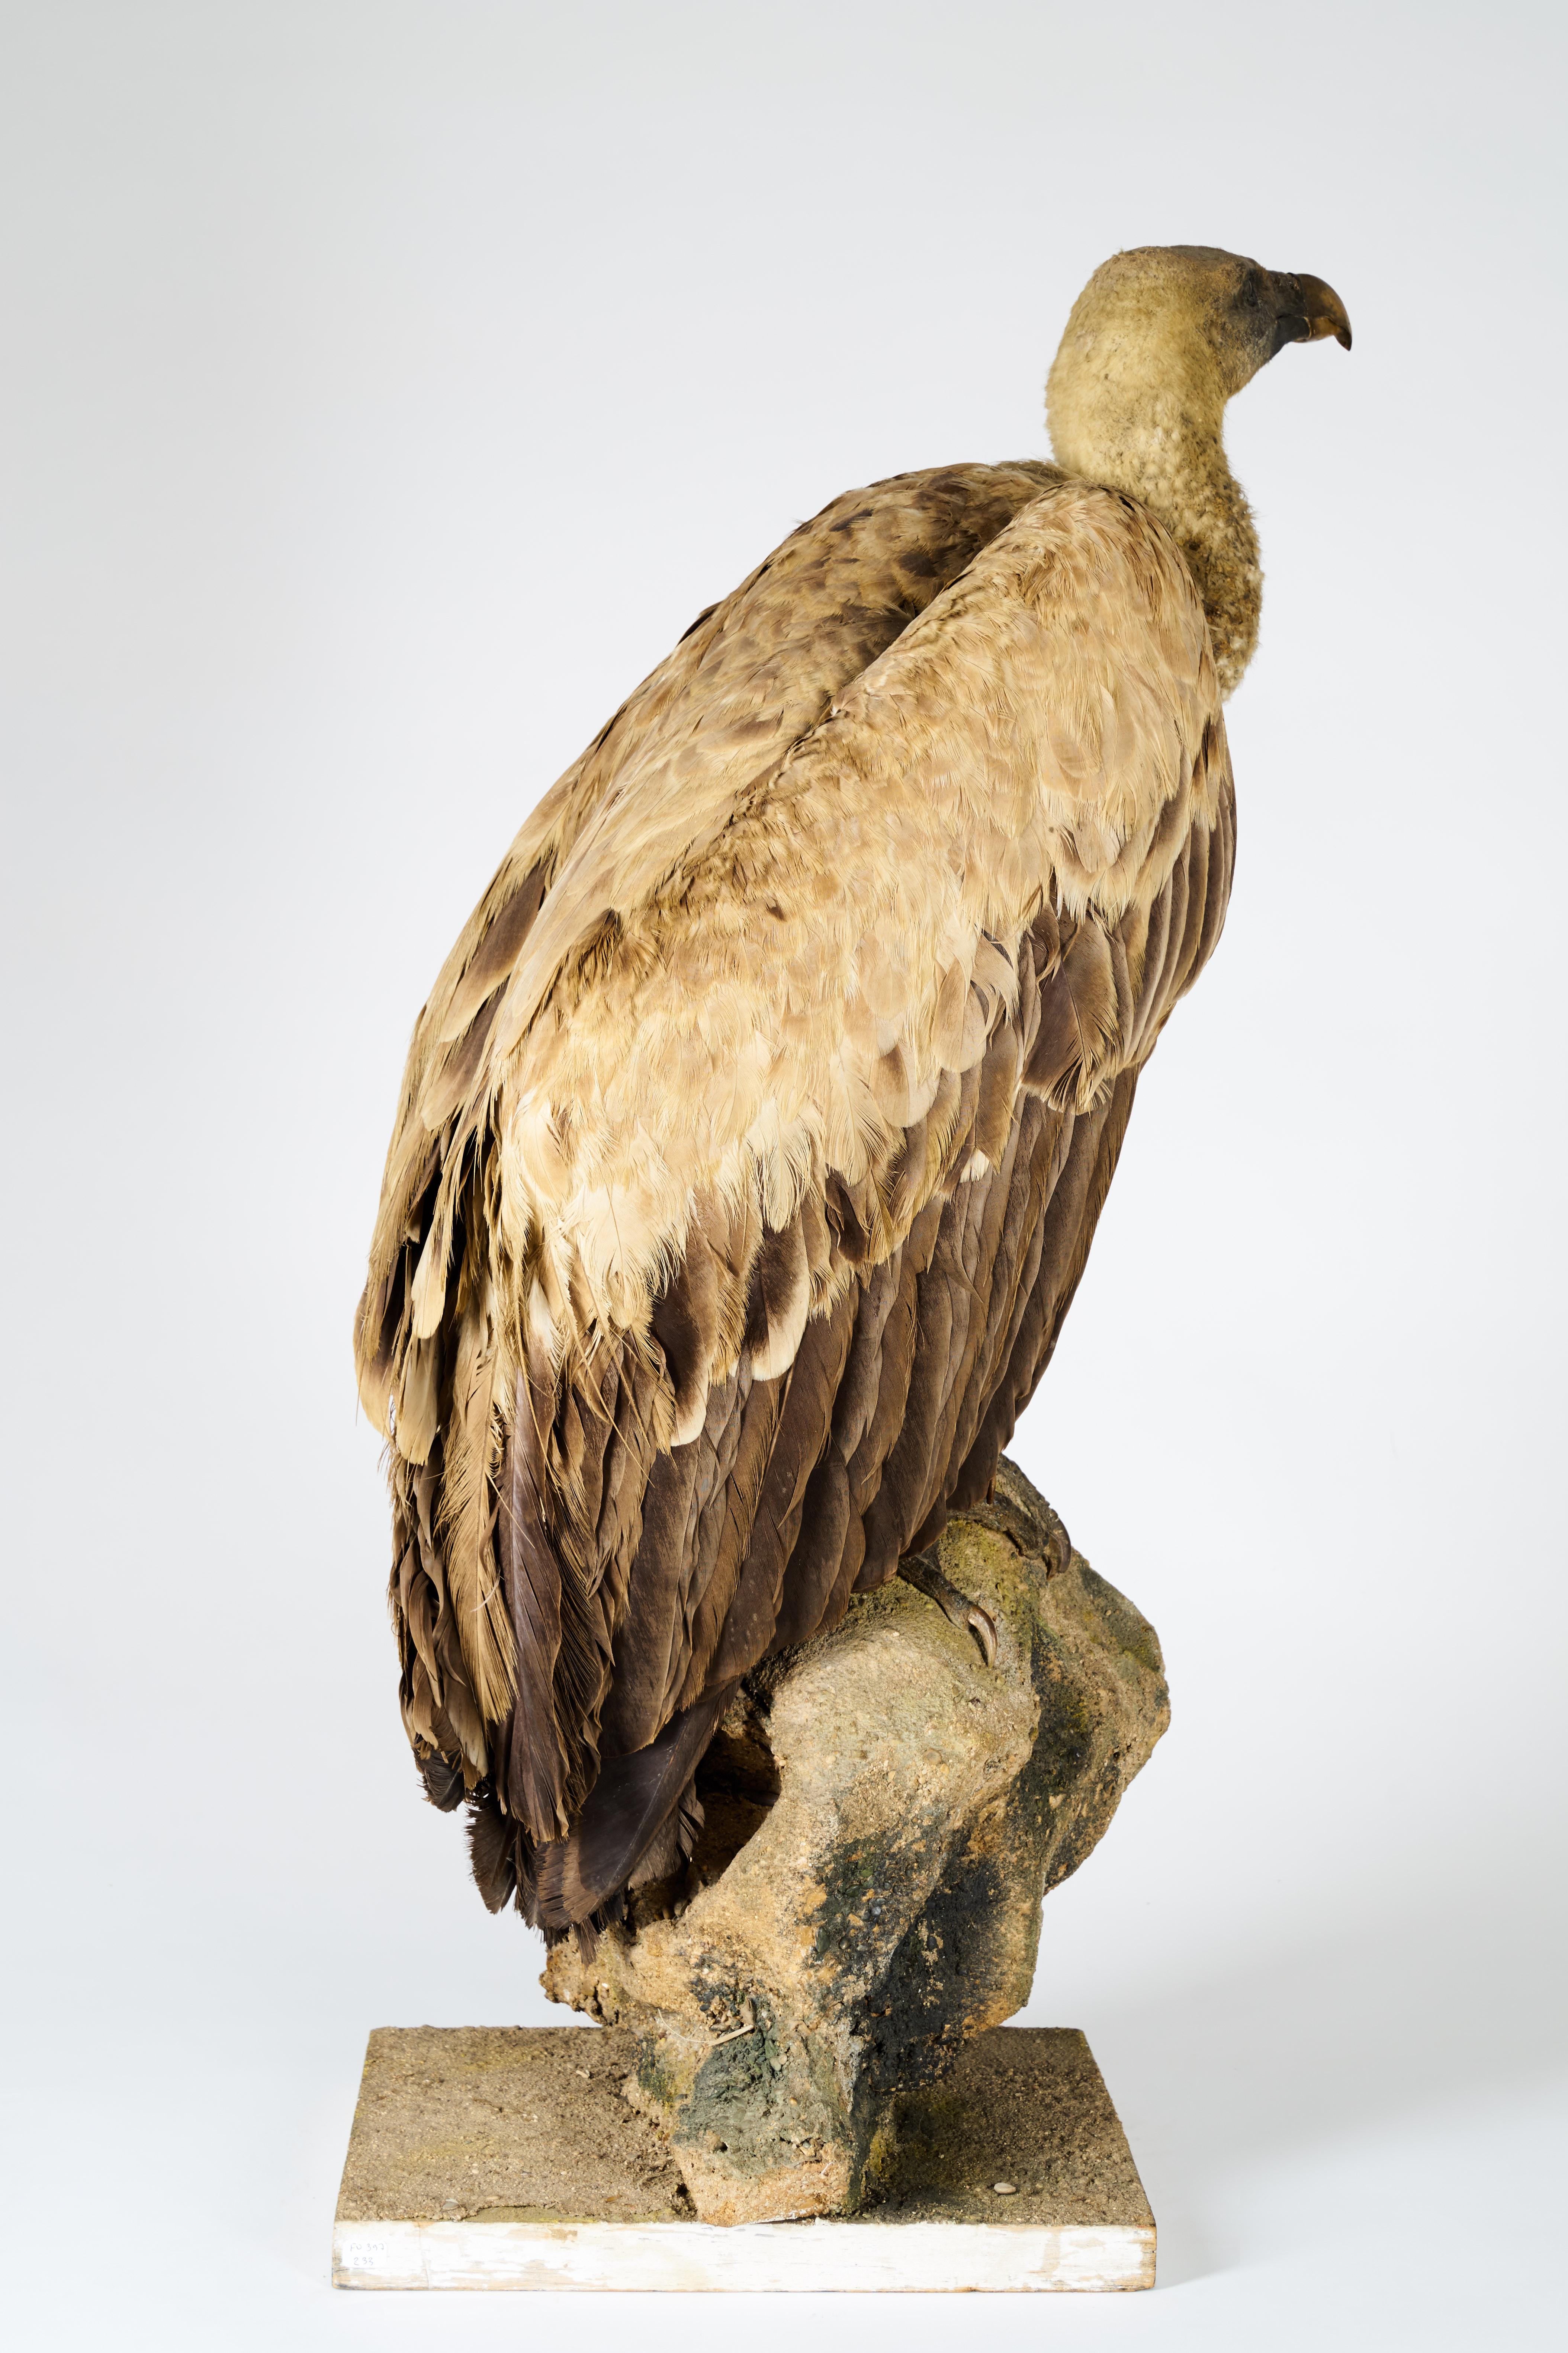 Unknown Griffon Vulture 'Gyps fulvus' on Antique White Stand